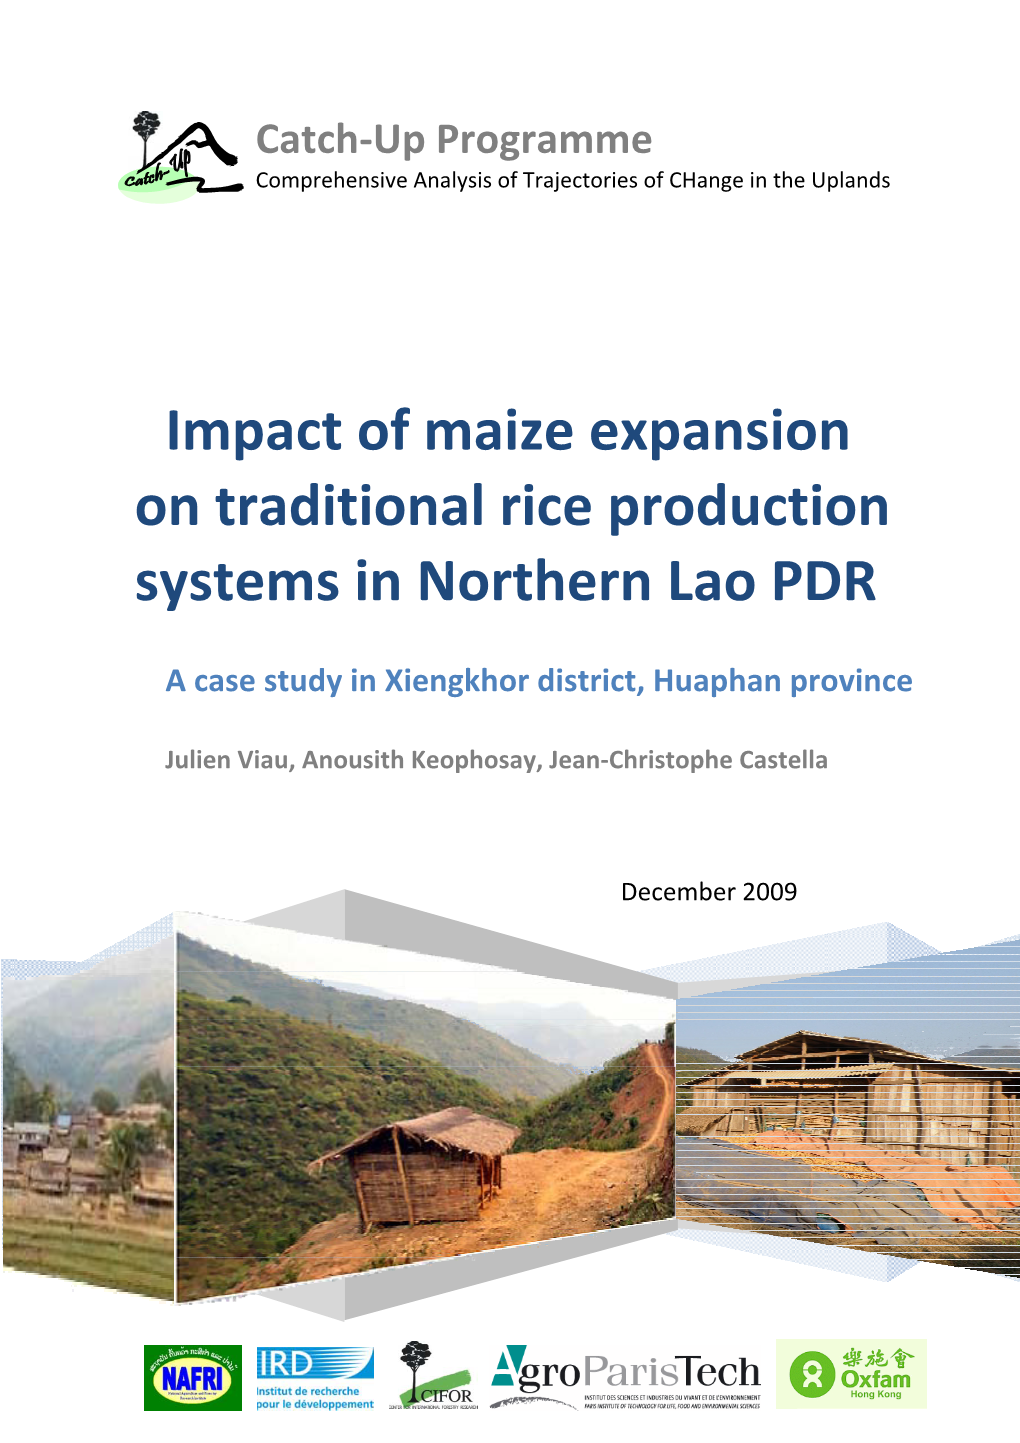 Impact of Maize Expansion on Traditional Rice Production Systems in Northern Lao PDR